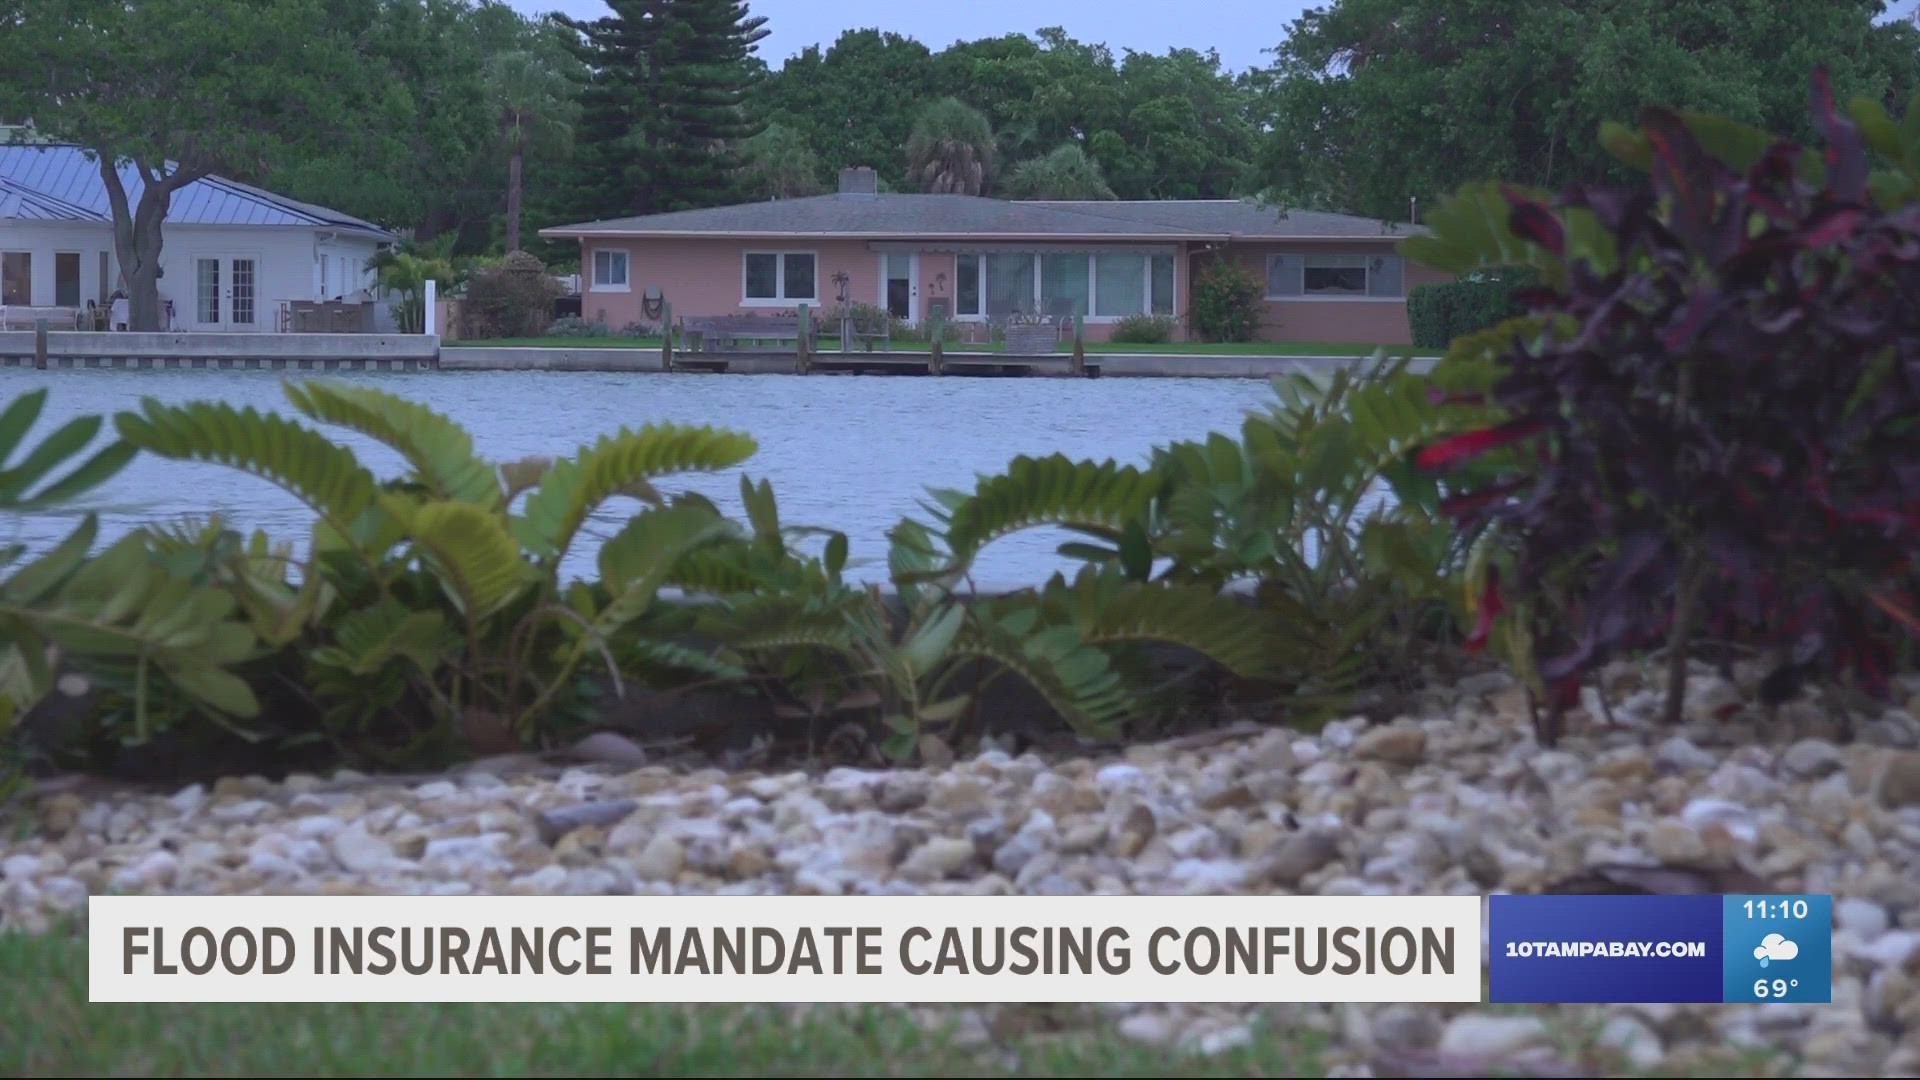 Confused about flood insurance? We have a detailed explanation